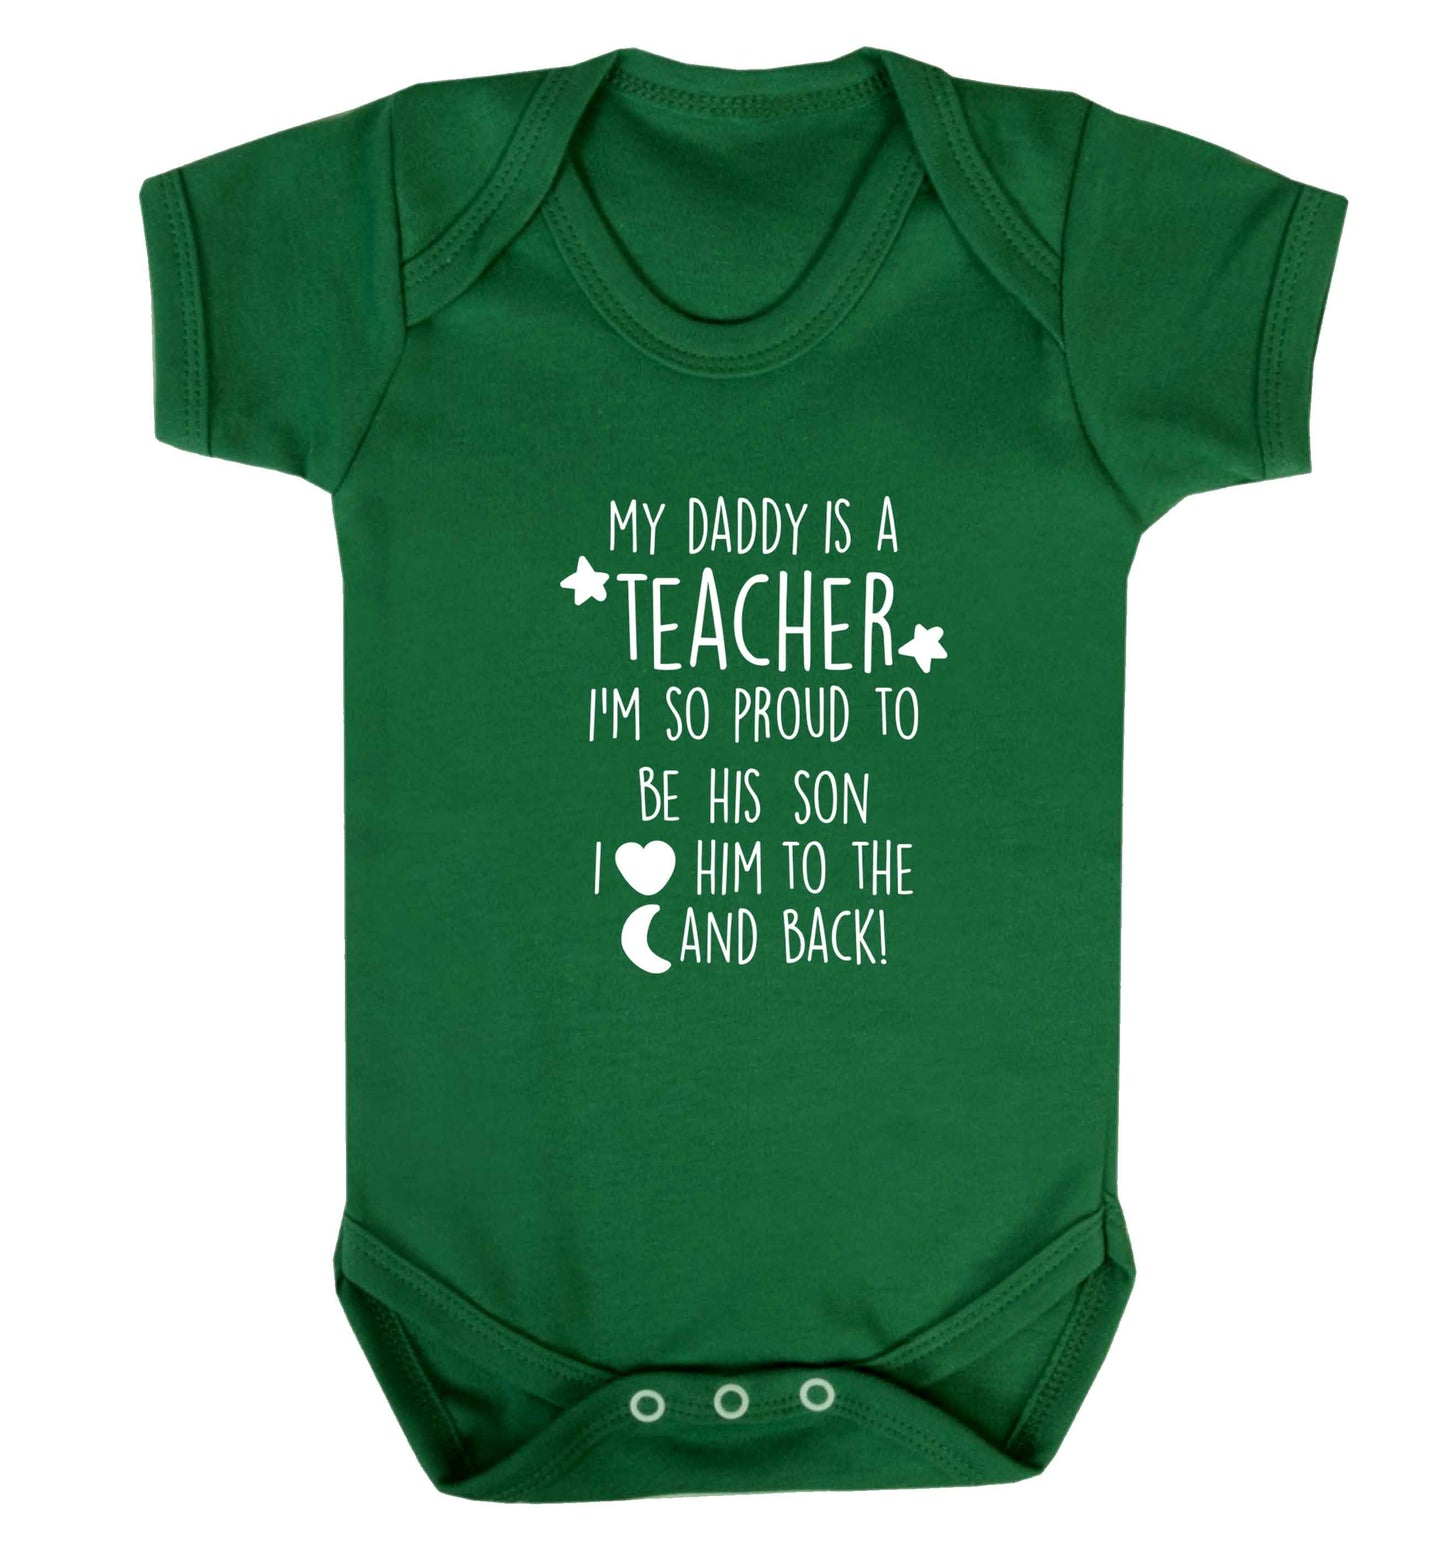 My daddy is a teacher I'm so proud to be his son I love her to the moon and back baby vest green 18-24 months